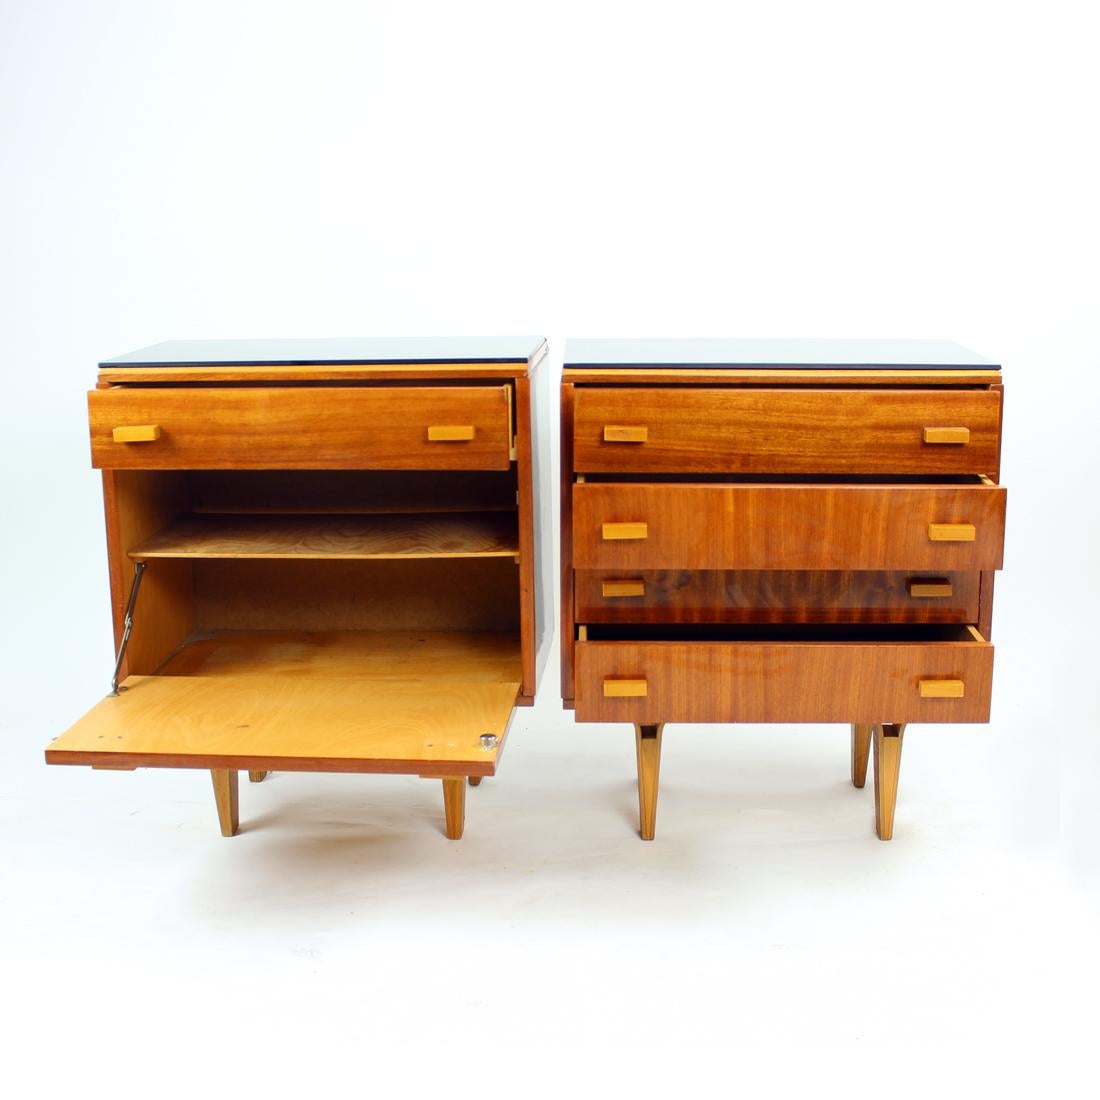 Set of two amazing and elegant bedside tables. Produced in Czechoslovakia by Novy domov in 1960s. Each table stands on legs made of bent plywood and is finished with a plate of black opaline glass on the top. The glass is in a very good condition,